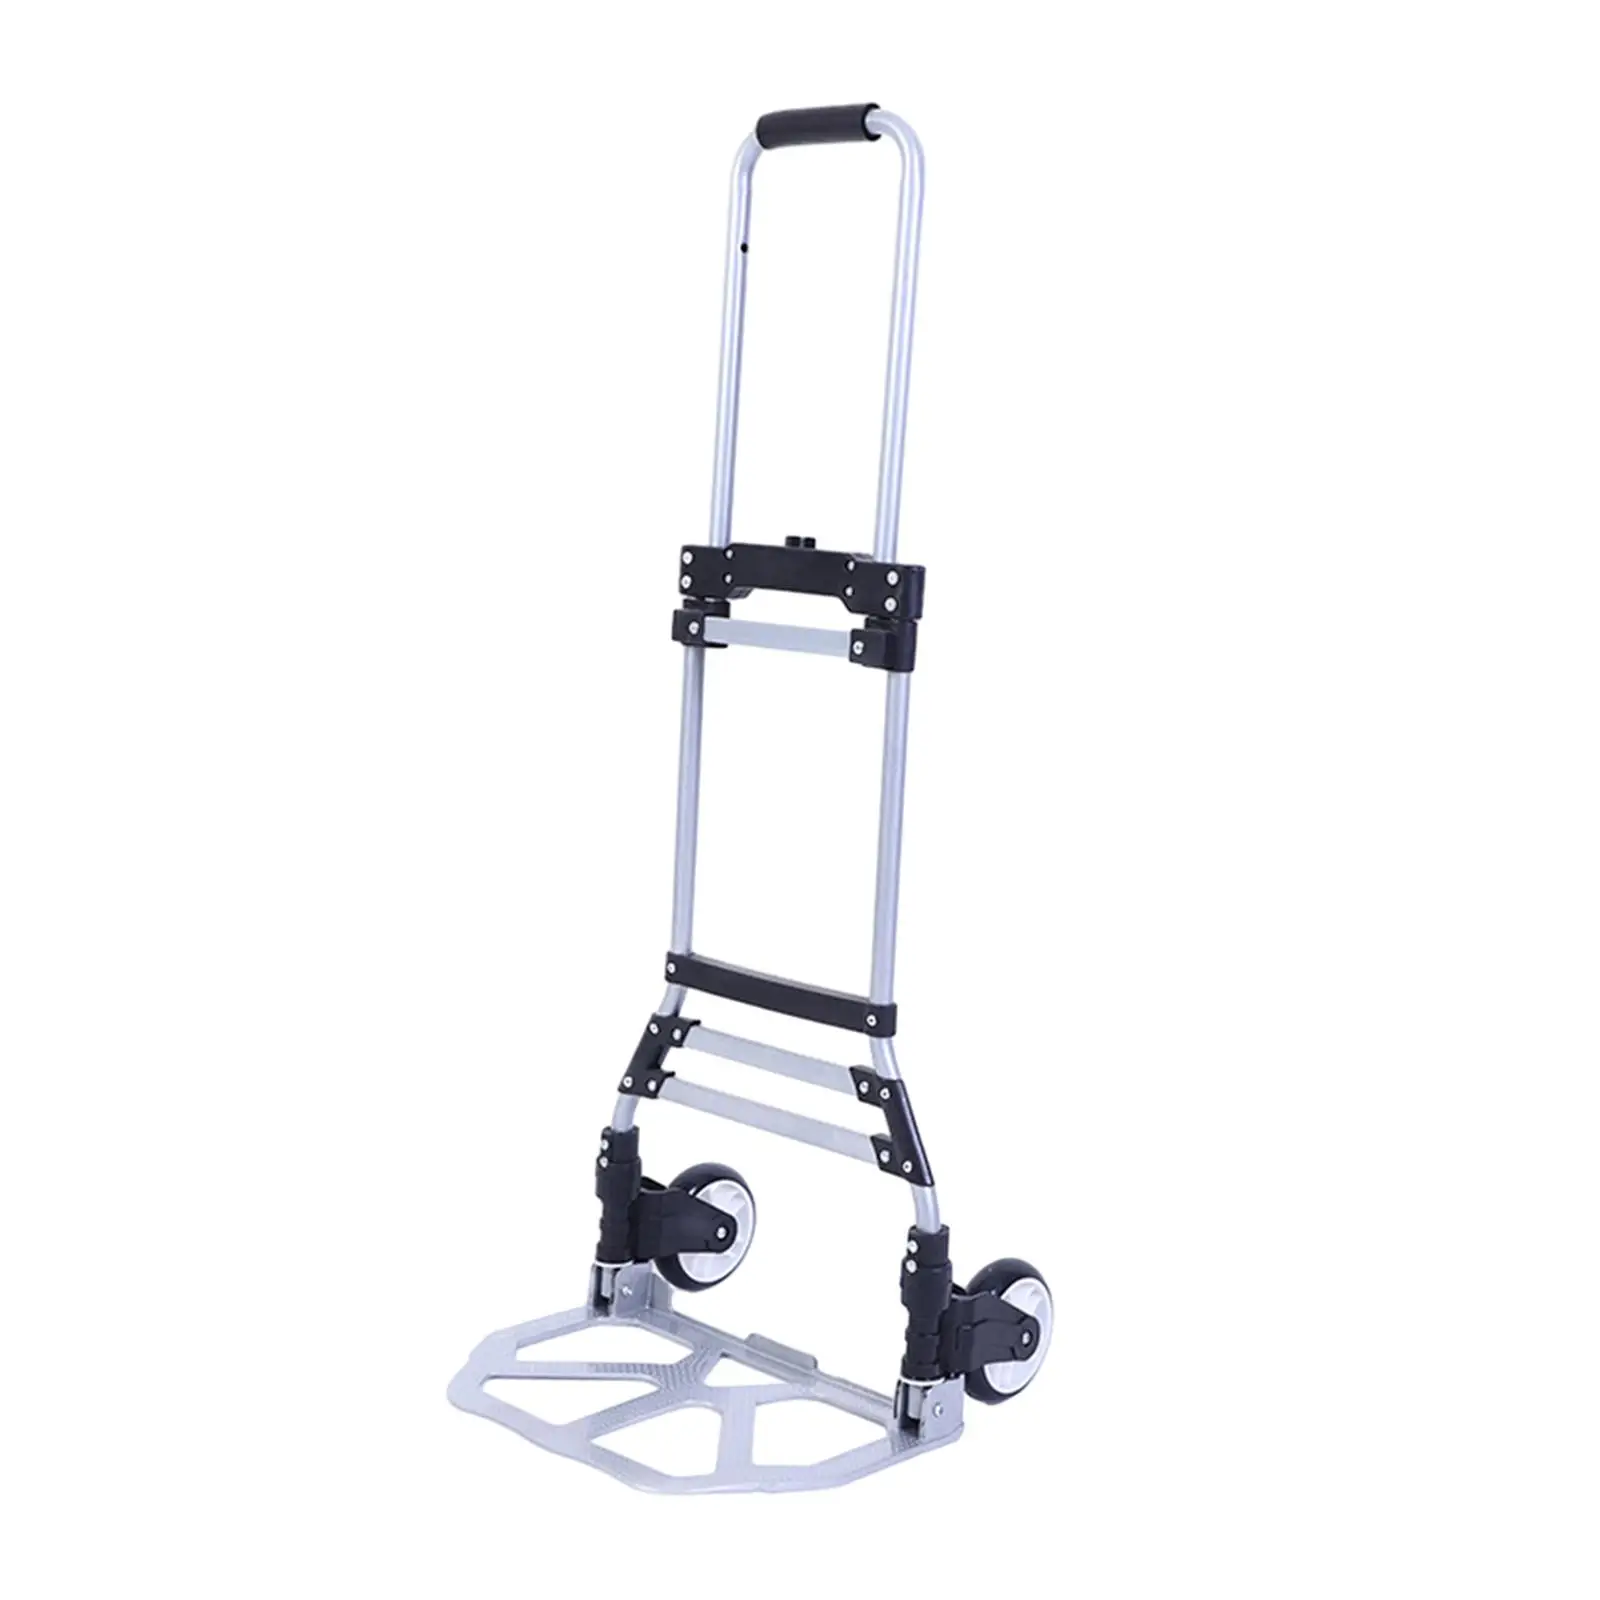 Foldable Roller Shopping Trolley Utility Cart Foldable Platform Truck Cart for Shopping Household Office Travel Moving